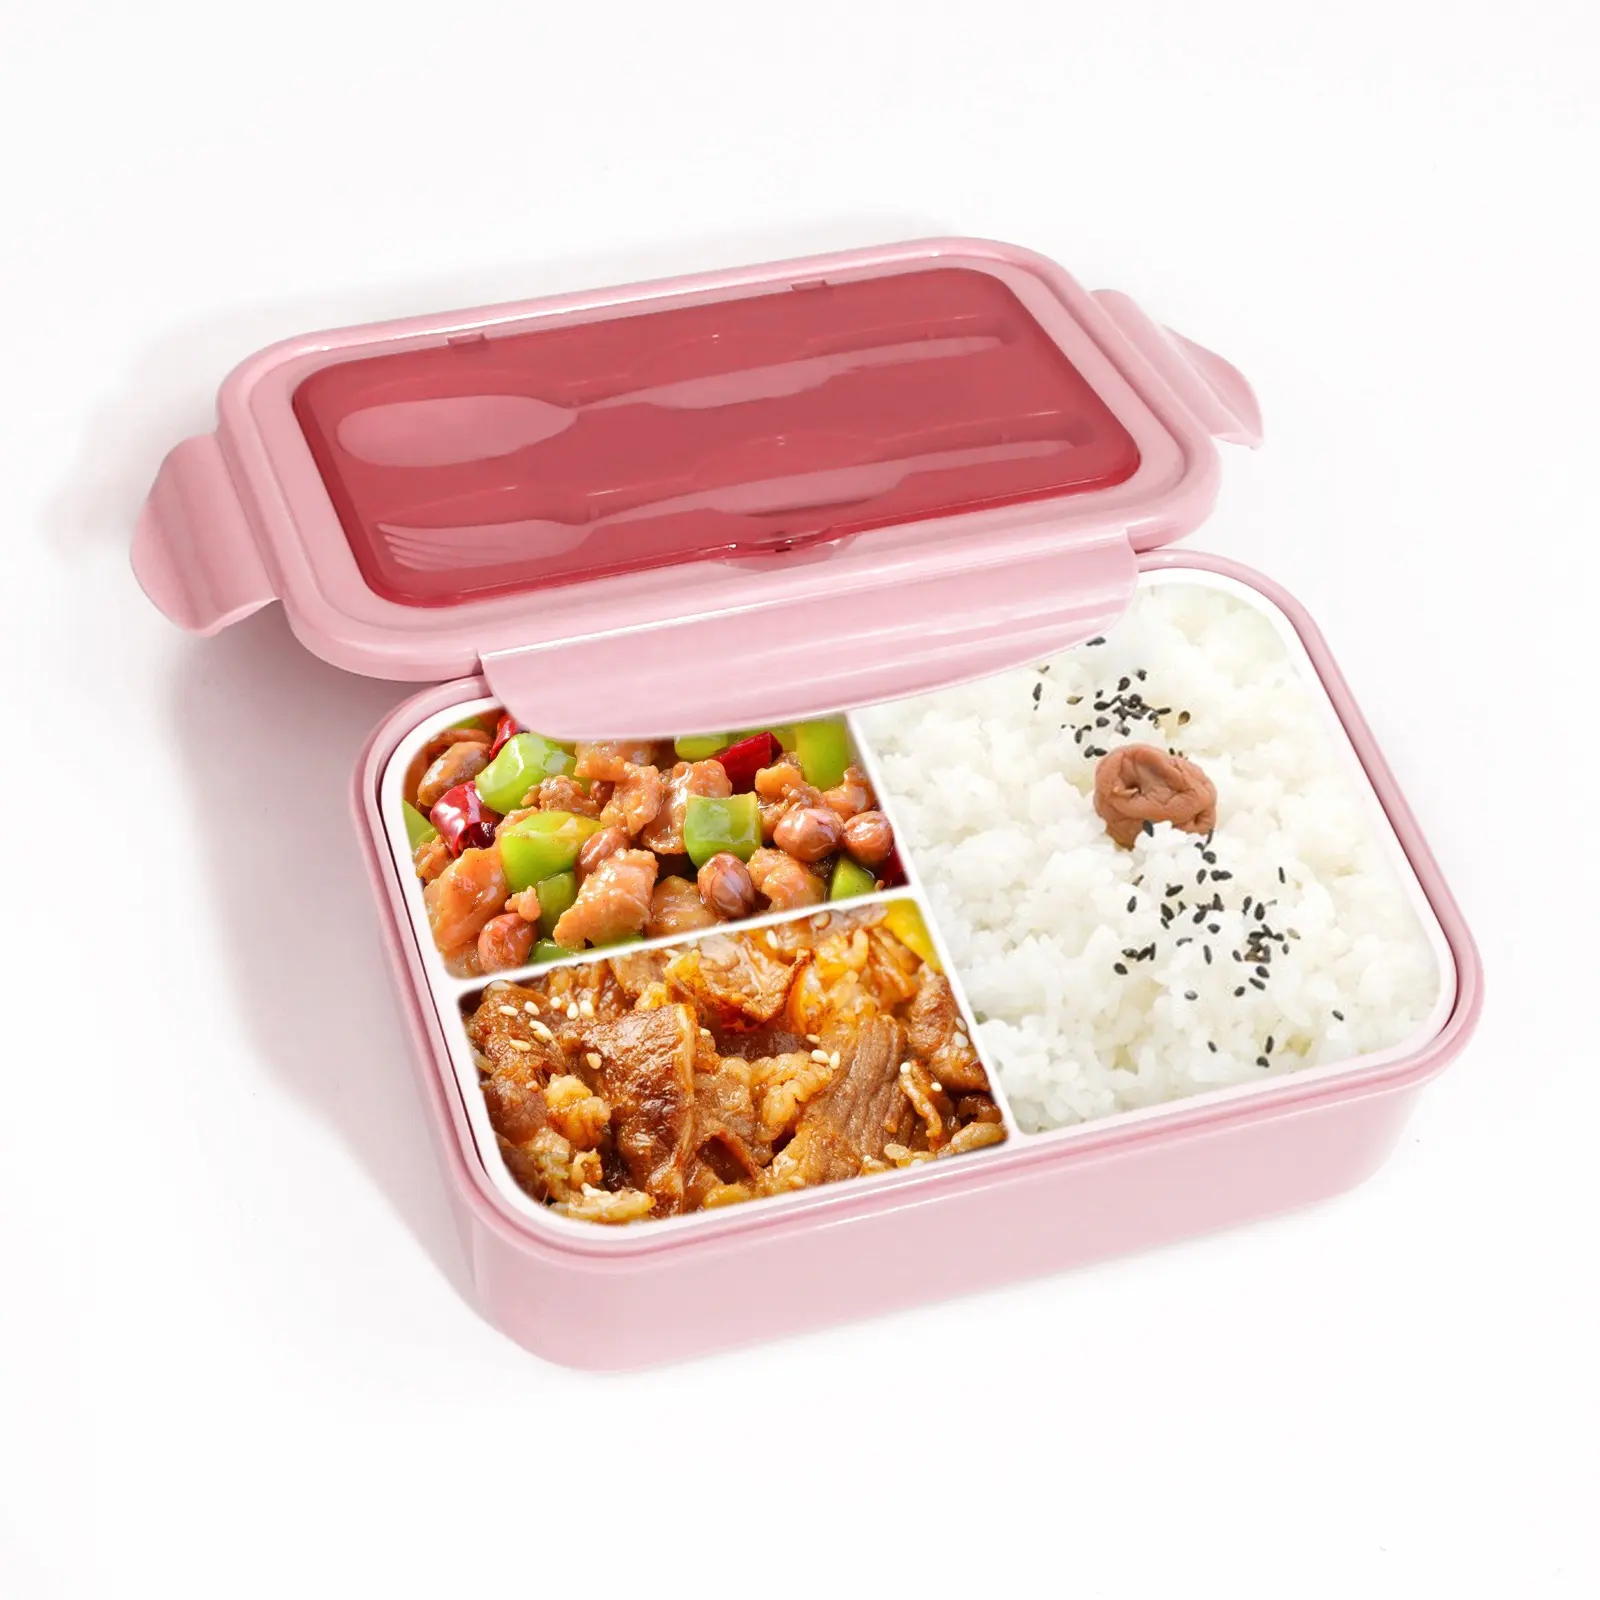 Wellfine 2022 Bpa Free custom Bento Girls School Kids Plastic Insulated Click To Go Lunch Boxes for Children's Adult